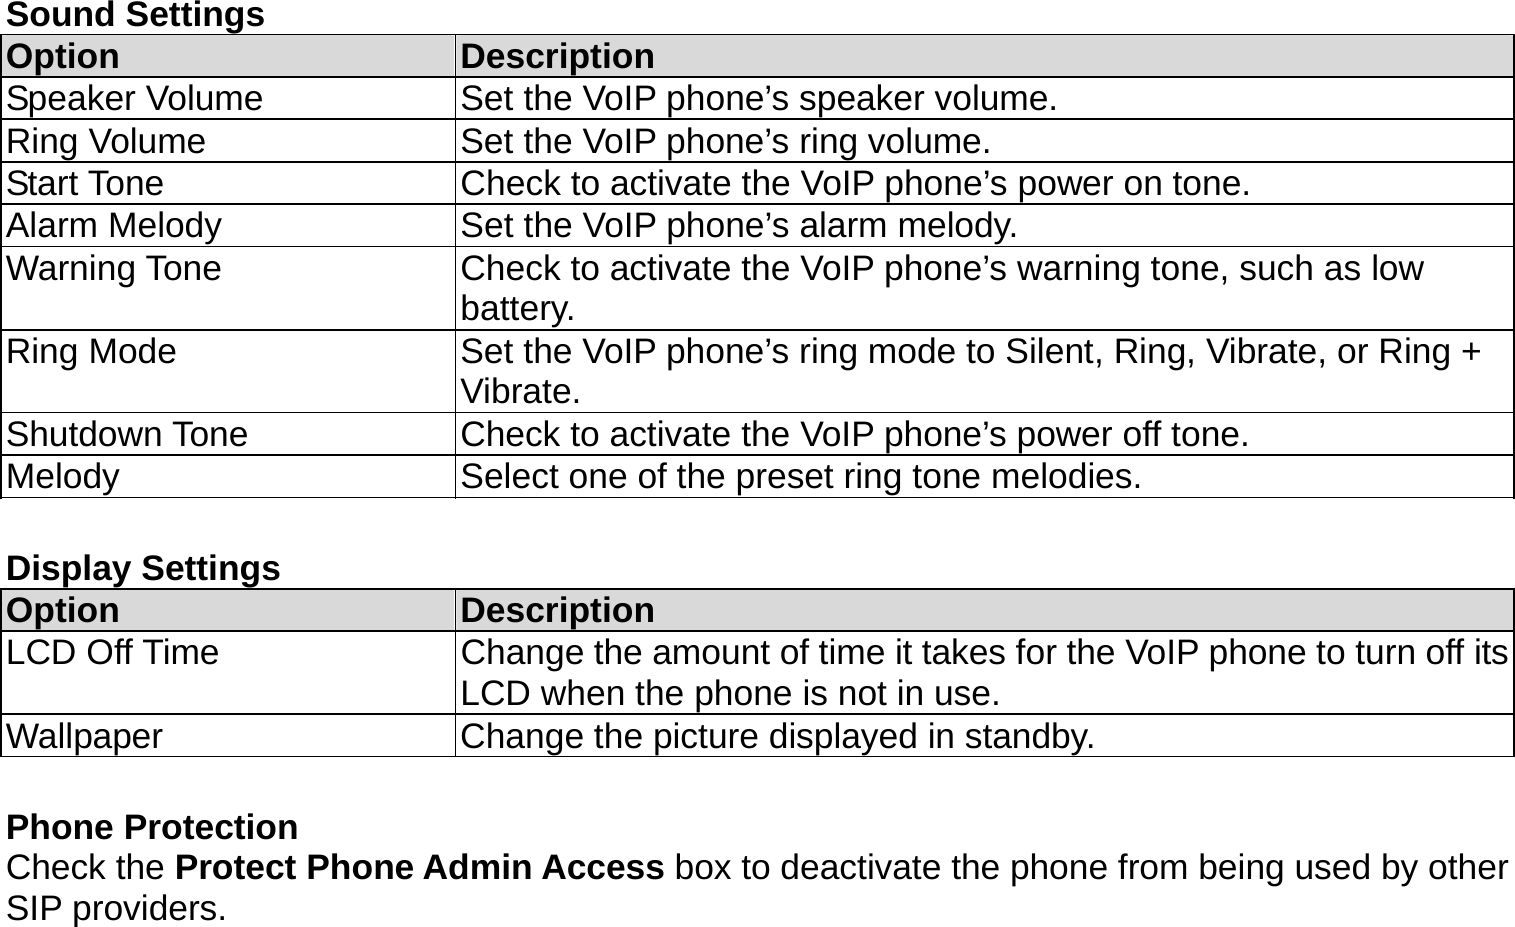 Sound Settings Option  Description Speaker Volume  Set the VoIP phone’s speaker volume. Ring Volume  Set the VoIP phone’s ring volume. Start Tone  Check to activate the VoIP phone’s power on tone. Alarm Melody  Set the VoIP phone’s alarm melody. Warning Tone  Check to activate the VoIP phone’s warning tone, such as low battery. Ring Mode  Set the VoIP phone’s ring mode to Silent, Ring, Vibrate, or Ring + Vibrate. Shutdown Tone  Check to activate the VoIP phone’s power off tone. Melody  Select one of the preset ring tone melodies.  Display Settings Option  Description LCD Off Time  Change the amount of time it takes for the VoIP phone to turn off its LCD when the phone is not in use. Wallpaper  Change the picture displayed in standby.  Phone Protection Check the Protect Phone Admin Access box to deactivate the phone from being used by other SIP providers.  